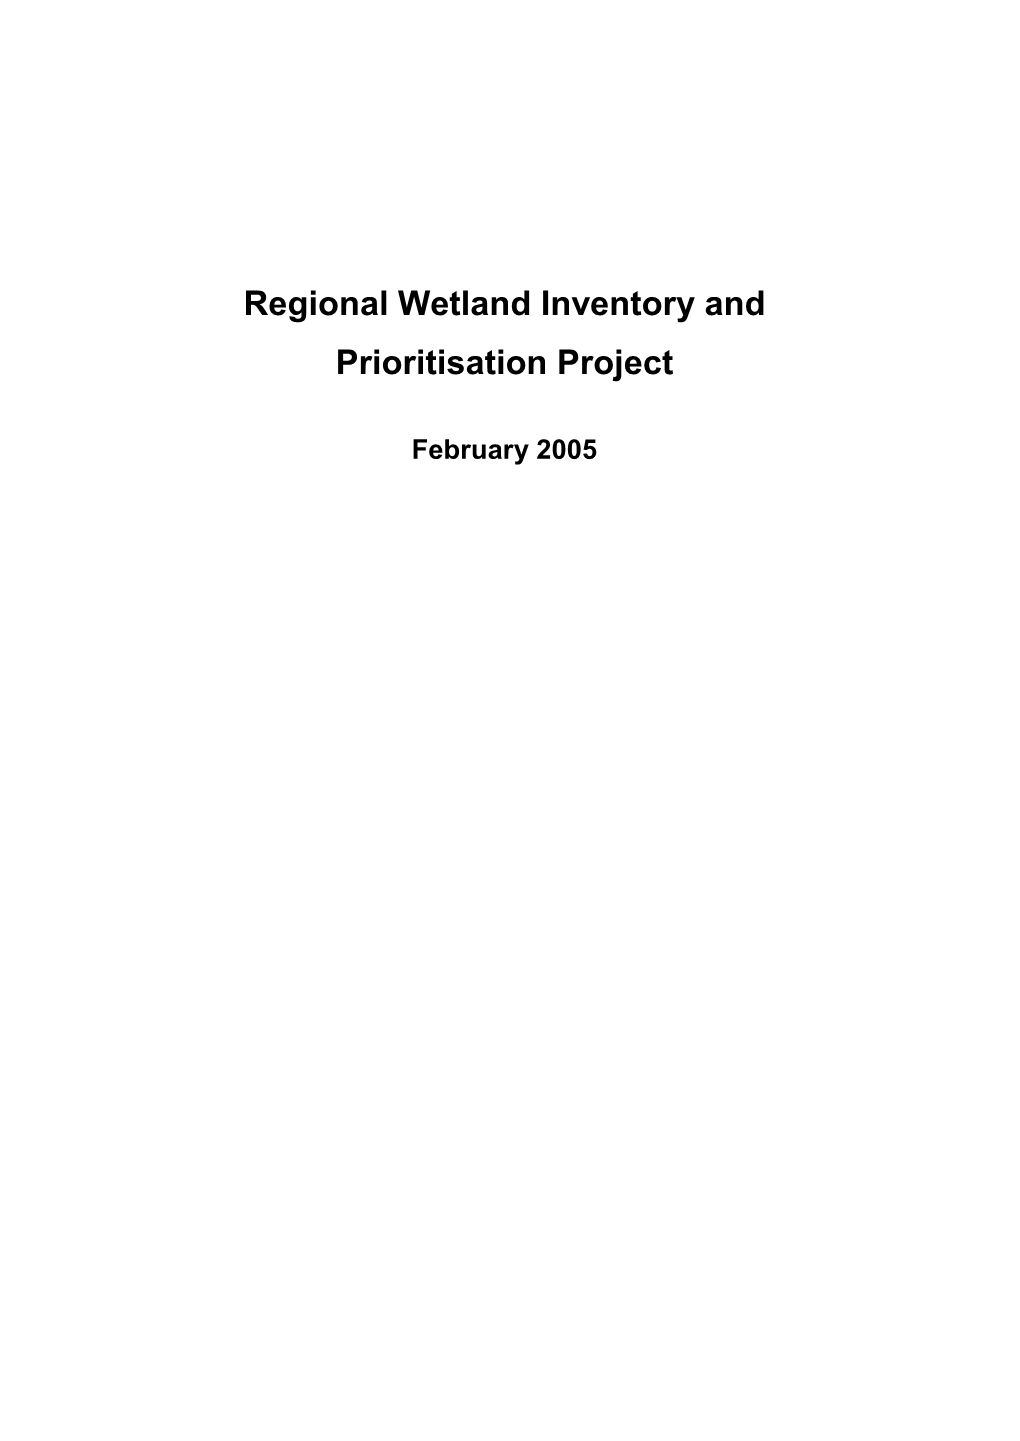 Regional Wetland Inventory and Prioritisation Project